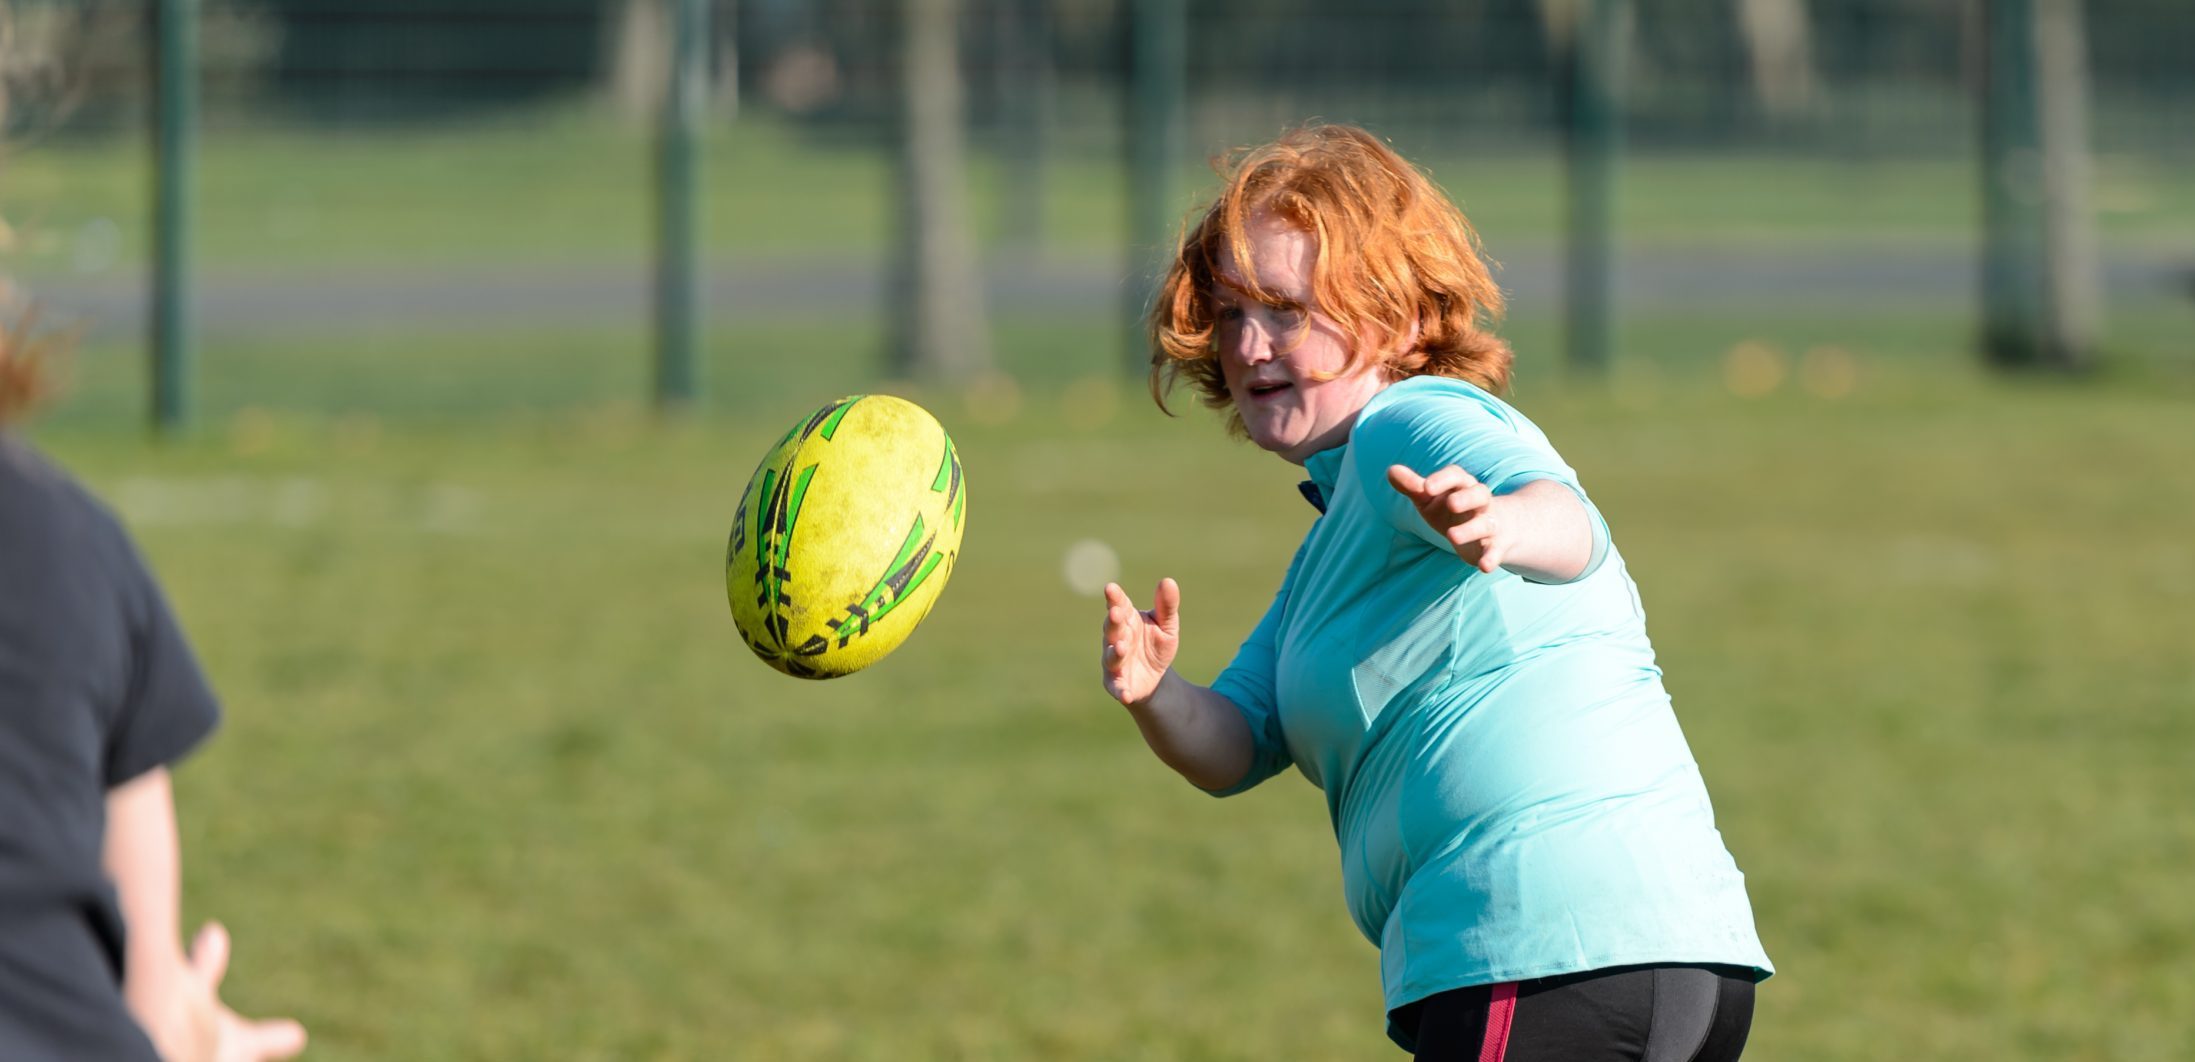 Red haired woman aged 35-45 playing rugby